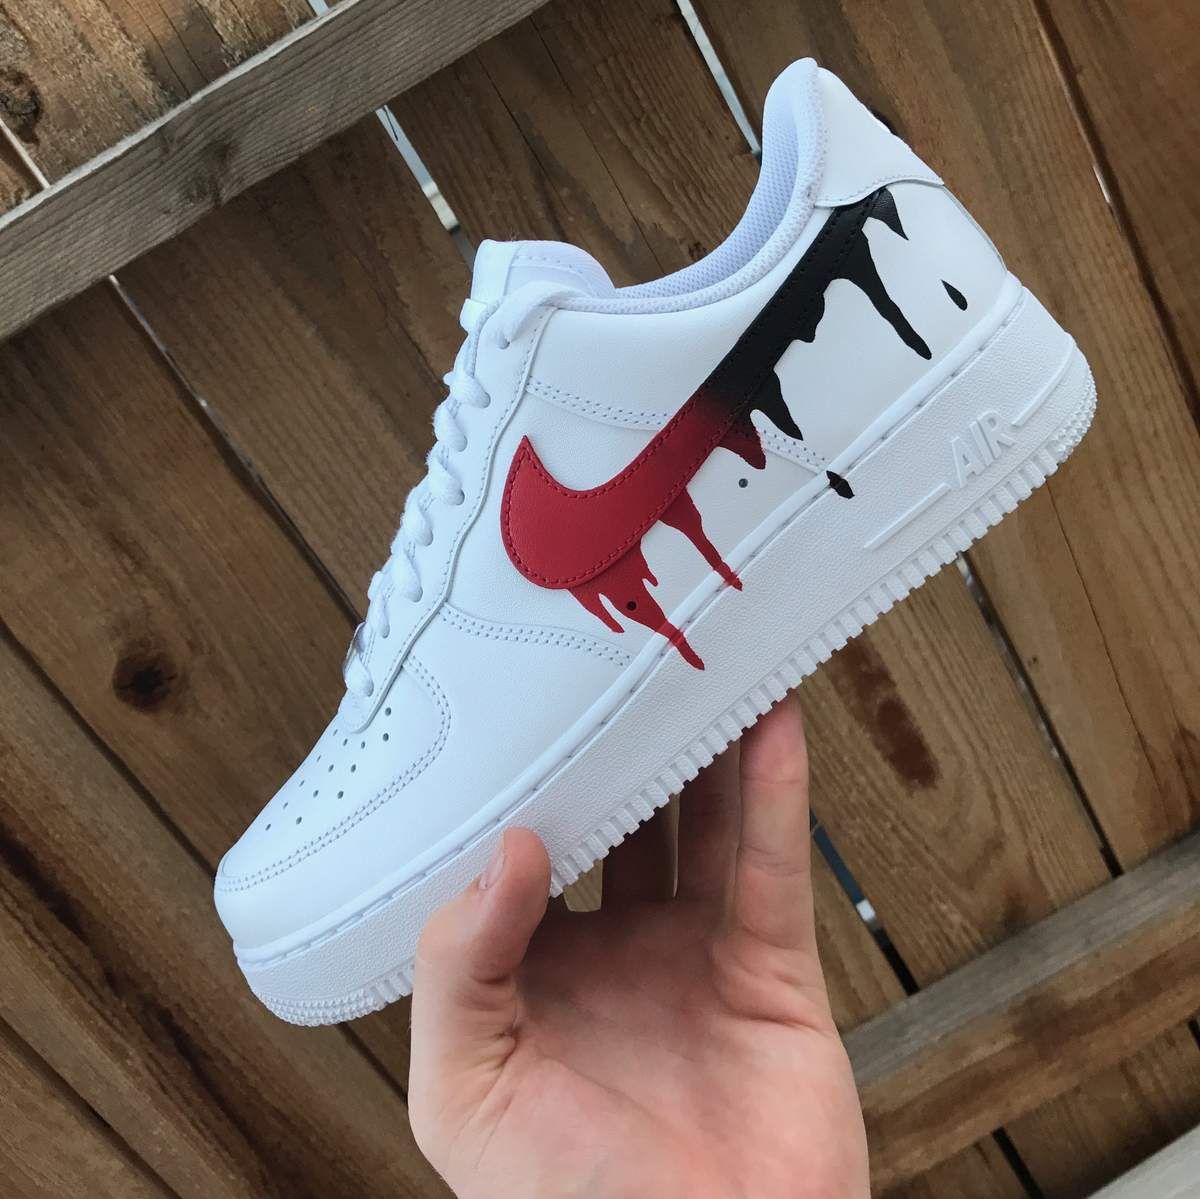 YouFashion on Twitter: "nike air force 1 red : Nike Air Force 1 Black/Red  Drip - #Shoes - https://t.co/bKHZch8CRz https://t.co/WKZmt1lN81" / Twitter